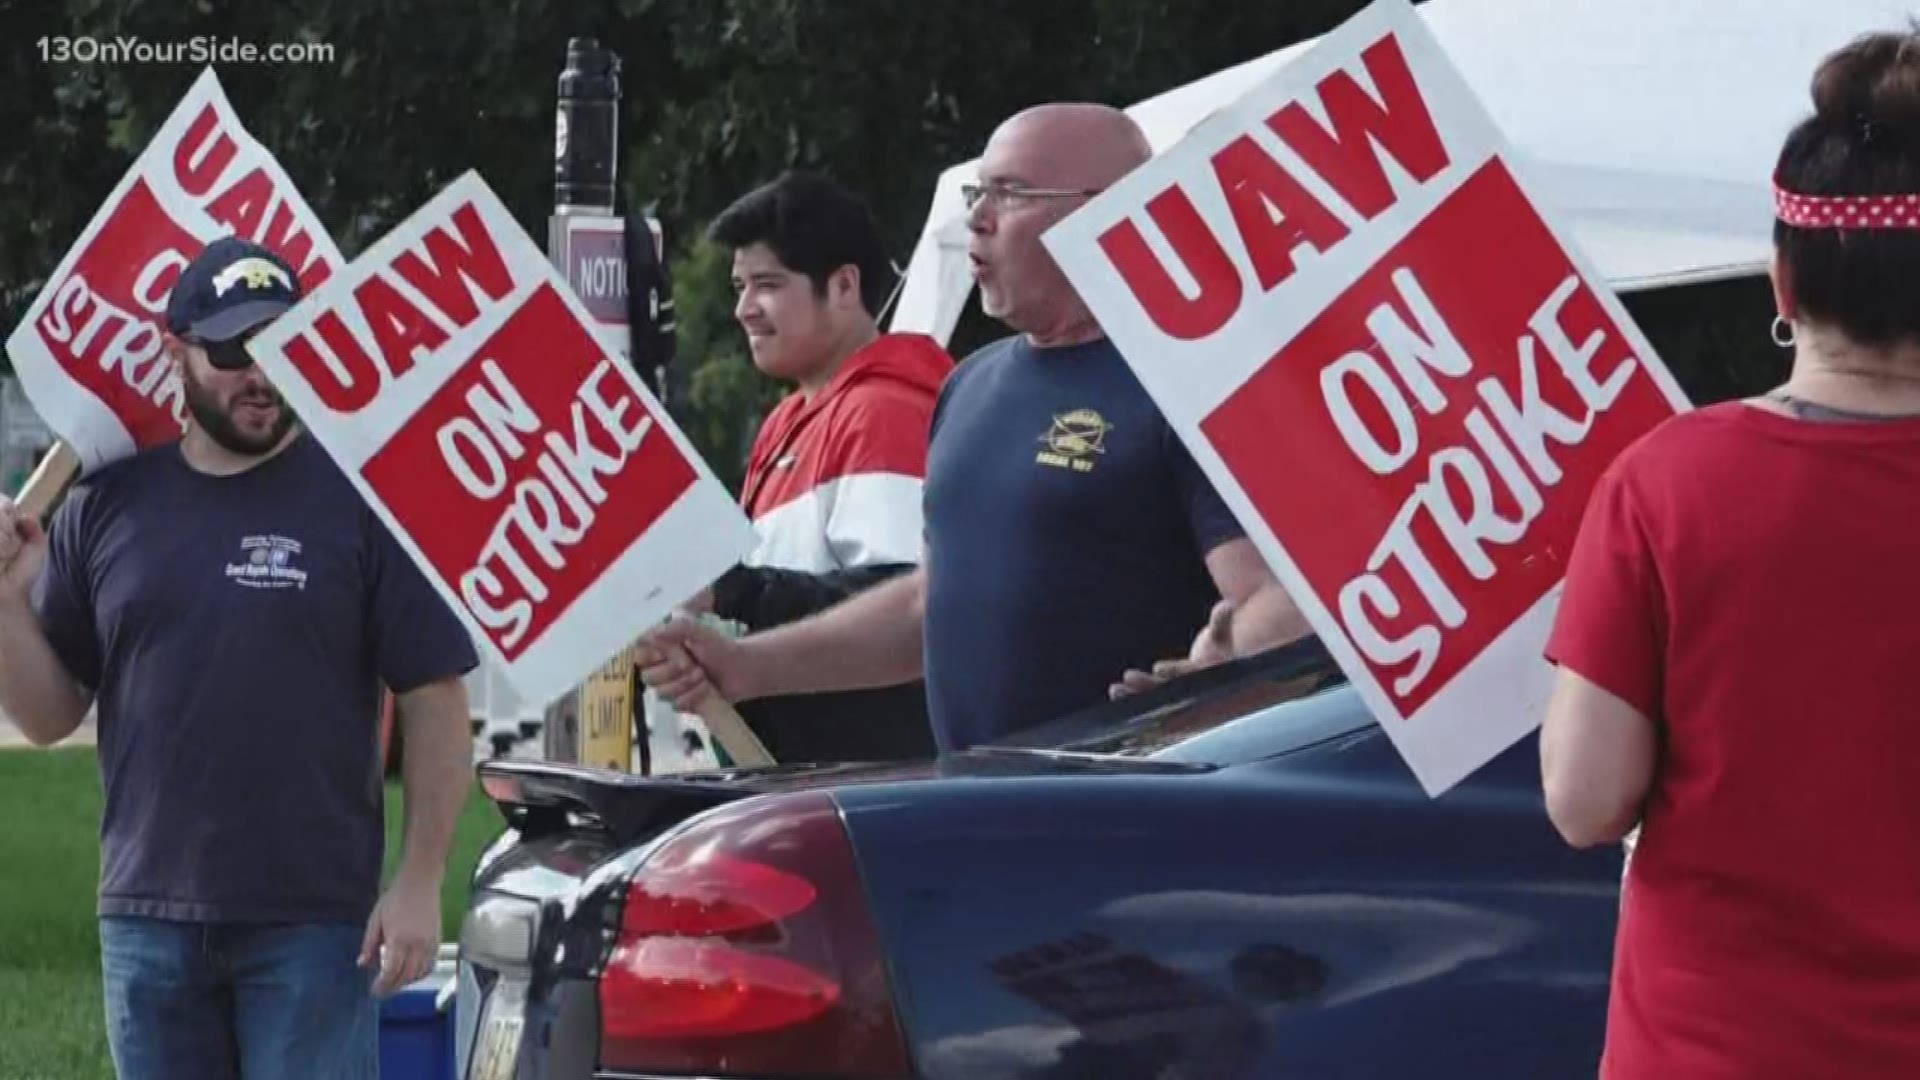 Contract talks aimed at ending a 22-day strike by the United Auto Workers against General Motors continued Monday after UAW union bargainers rejected an offer Sunday